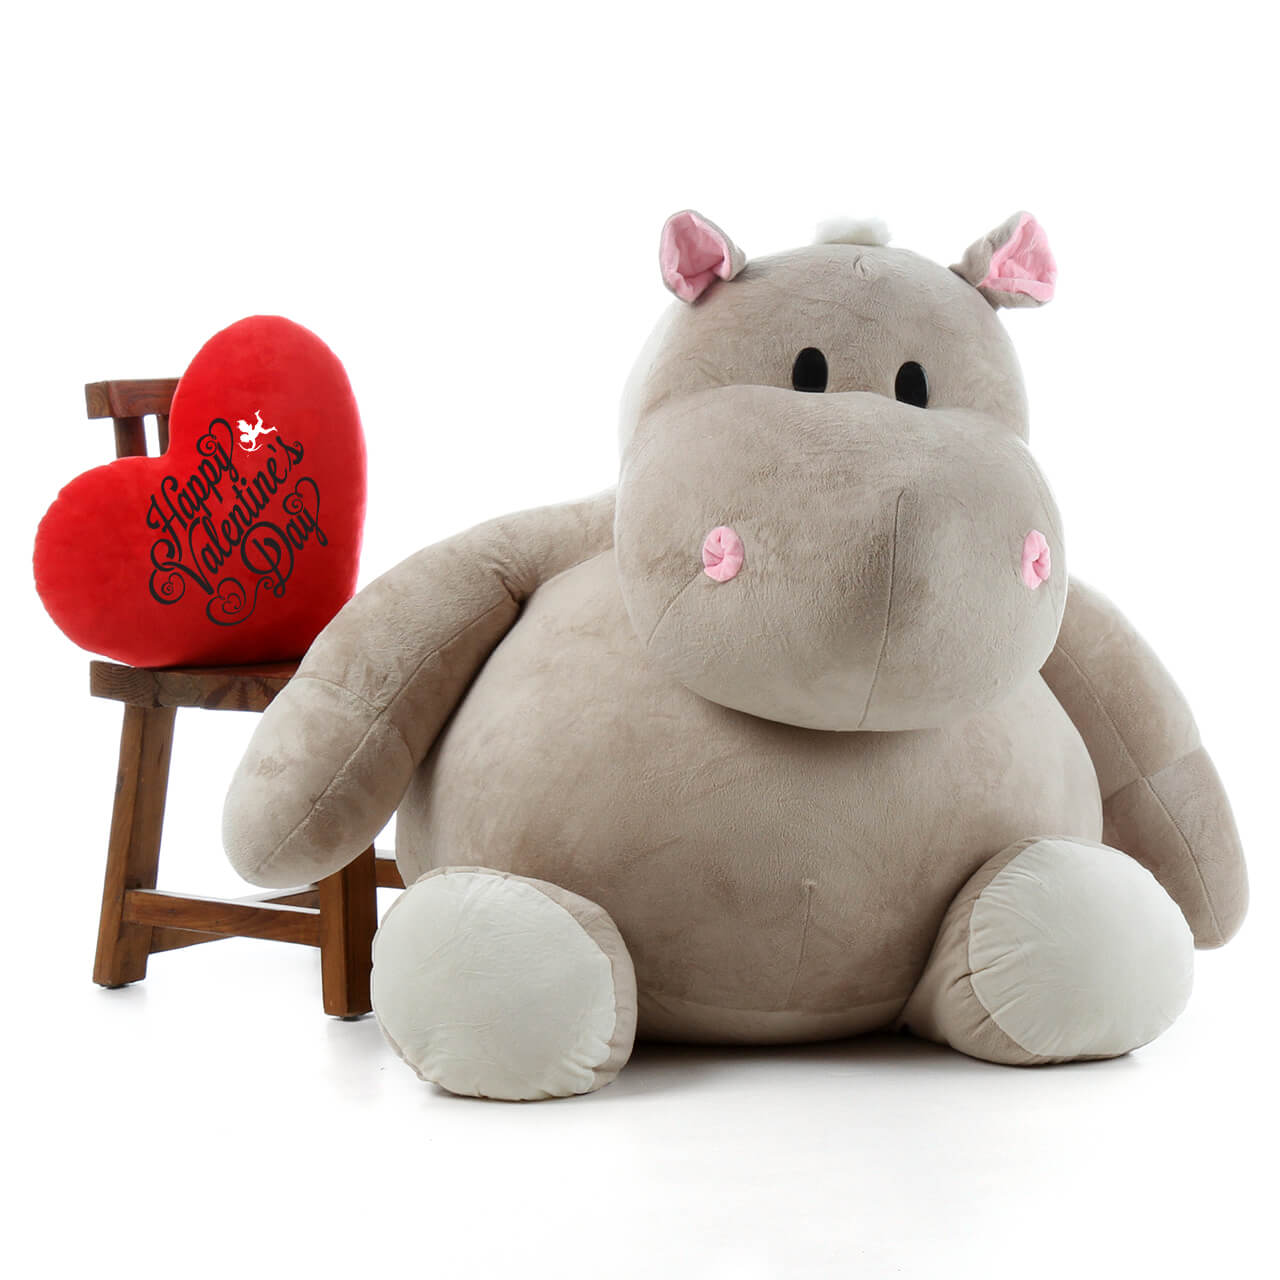 Details about   Hot Jumbo Hippo Plush Toys Giant 135cm Soft Stuffed Animals Hippo Pillow gifts 